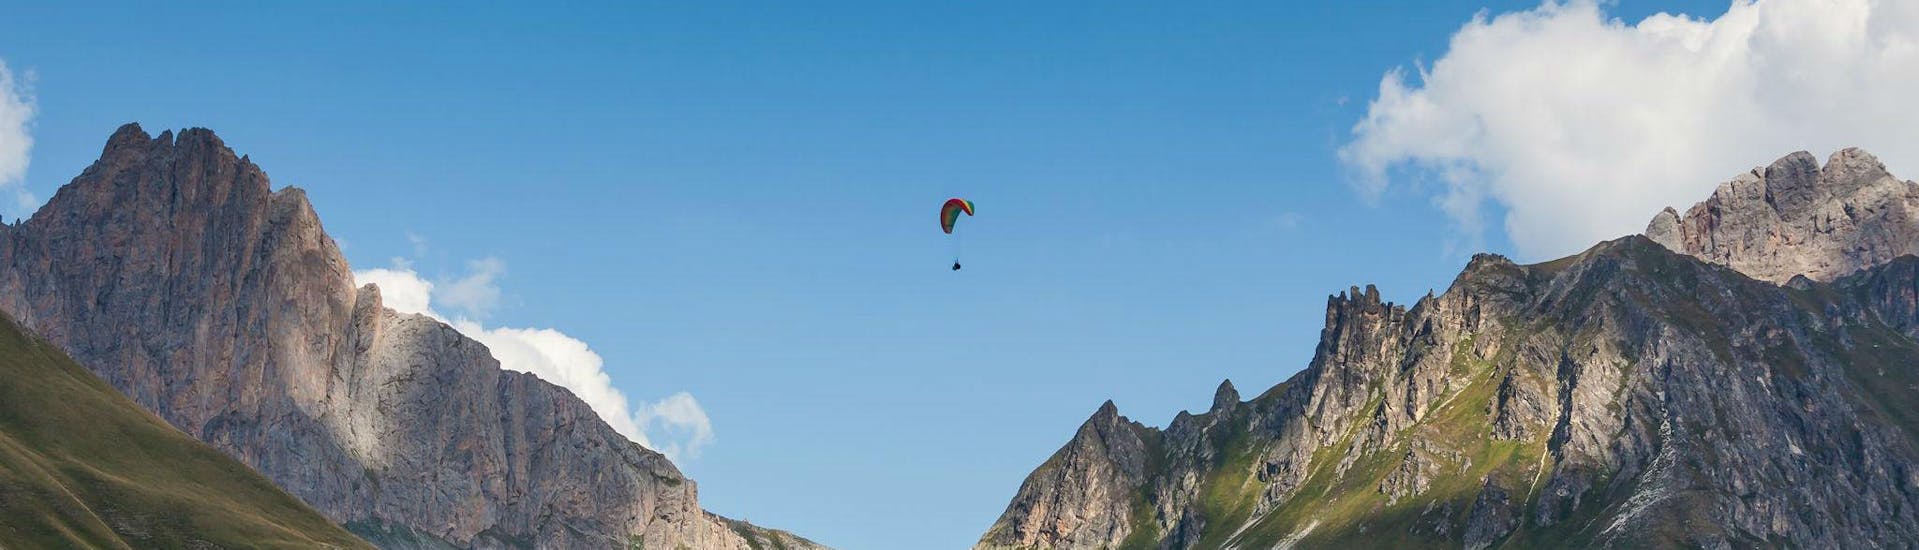 A paragliding pilot from Emotion'Air is doing a Tandem Paragliding Acrobatic Flight from the Col du Galibier.